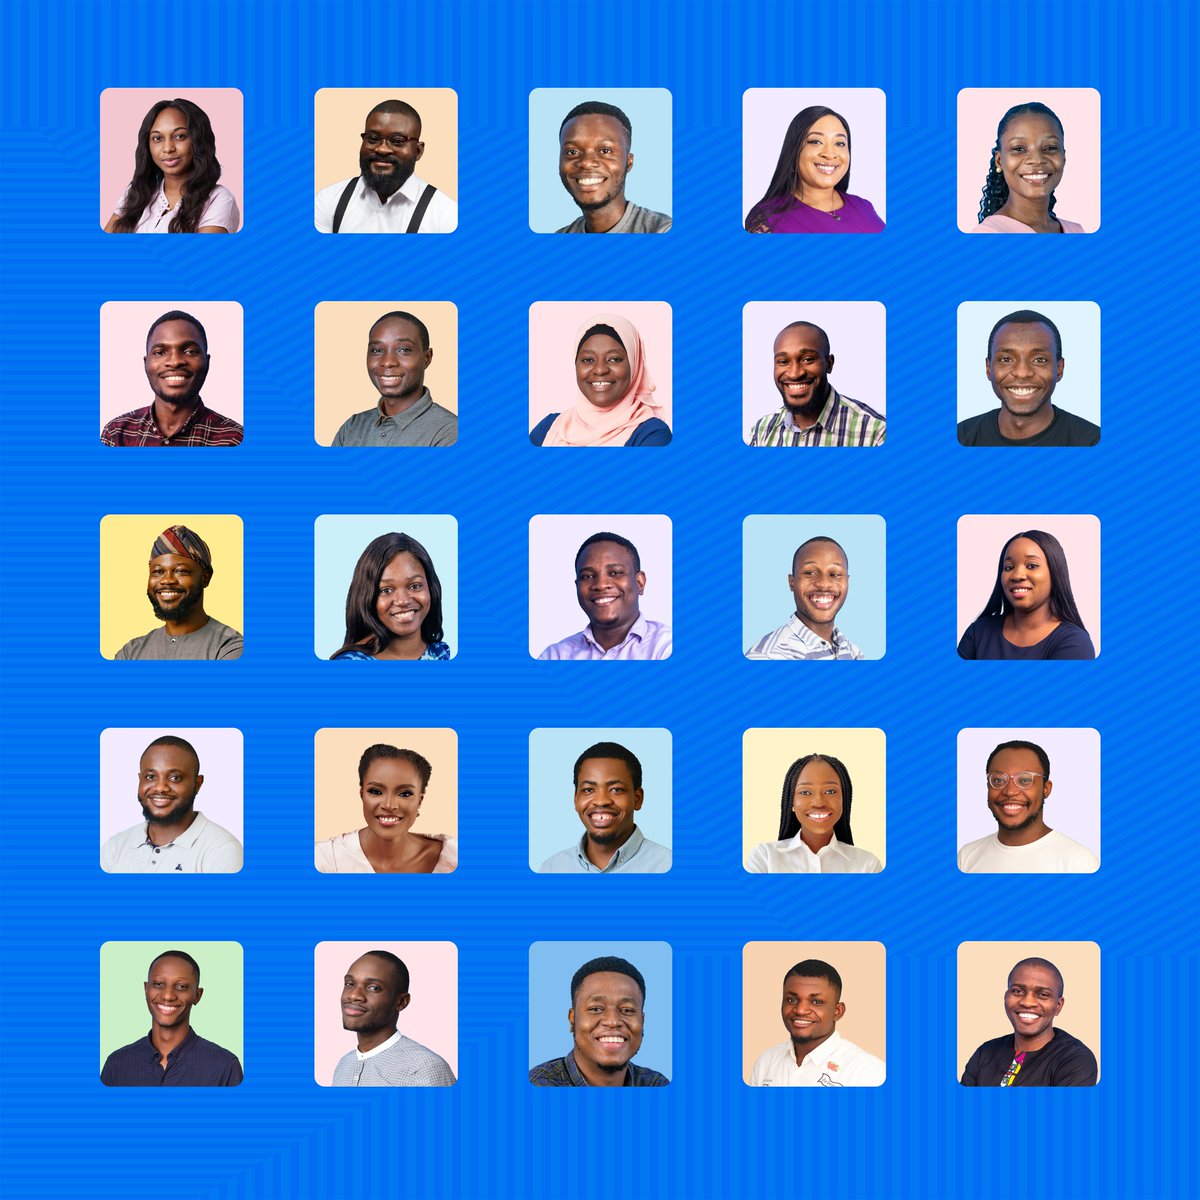 Today's shout-out goes to the Cowrywise team. 💙

We are especially grateful for the support we have in them. Their unique personalities and experiences are what make us a truly human and vibrant organization.

Thank you all for weaving your stories into ours, and for helping us